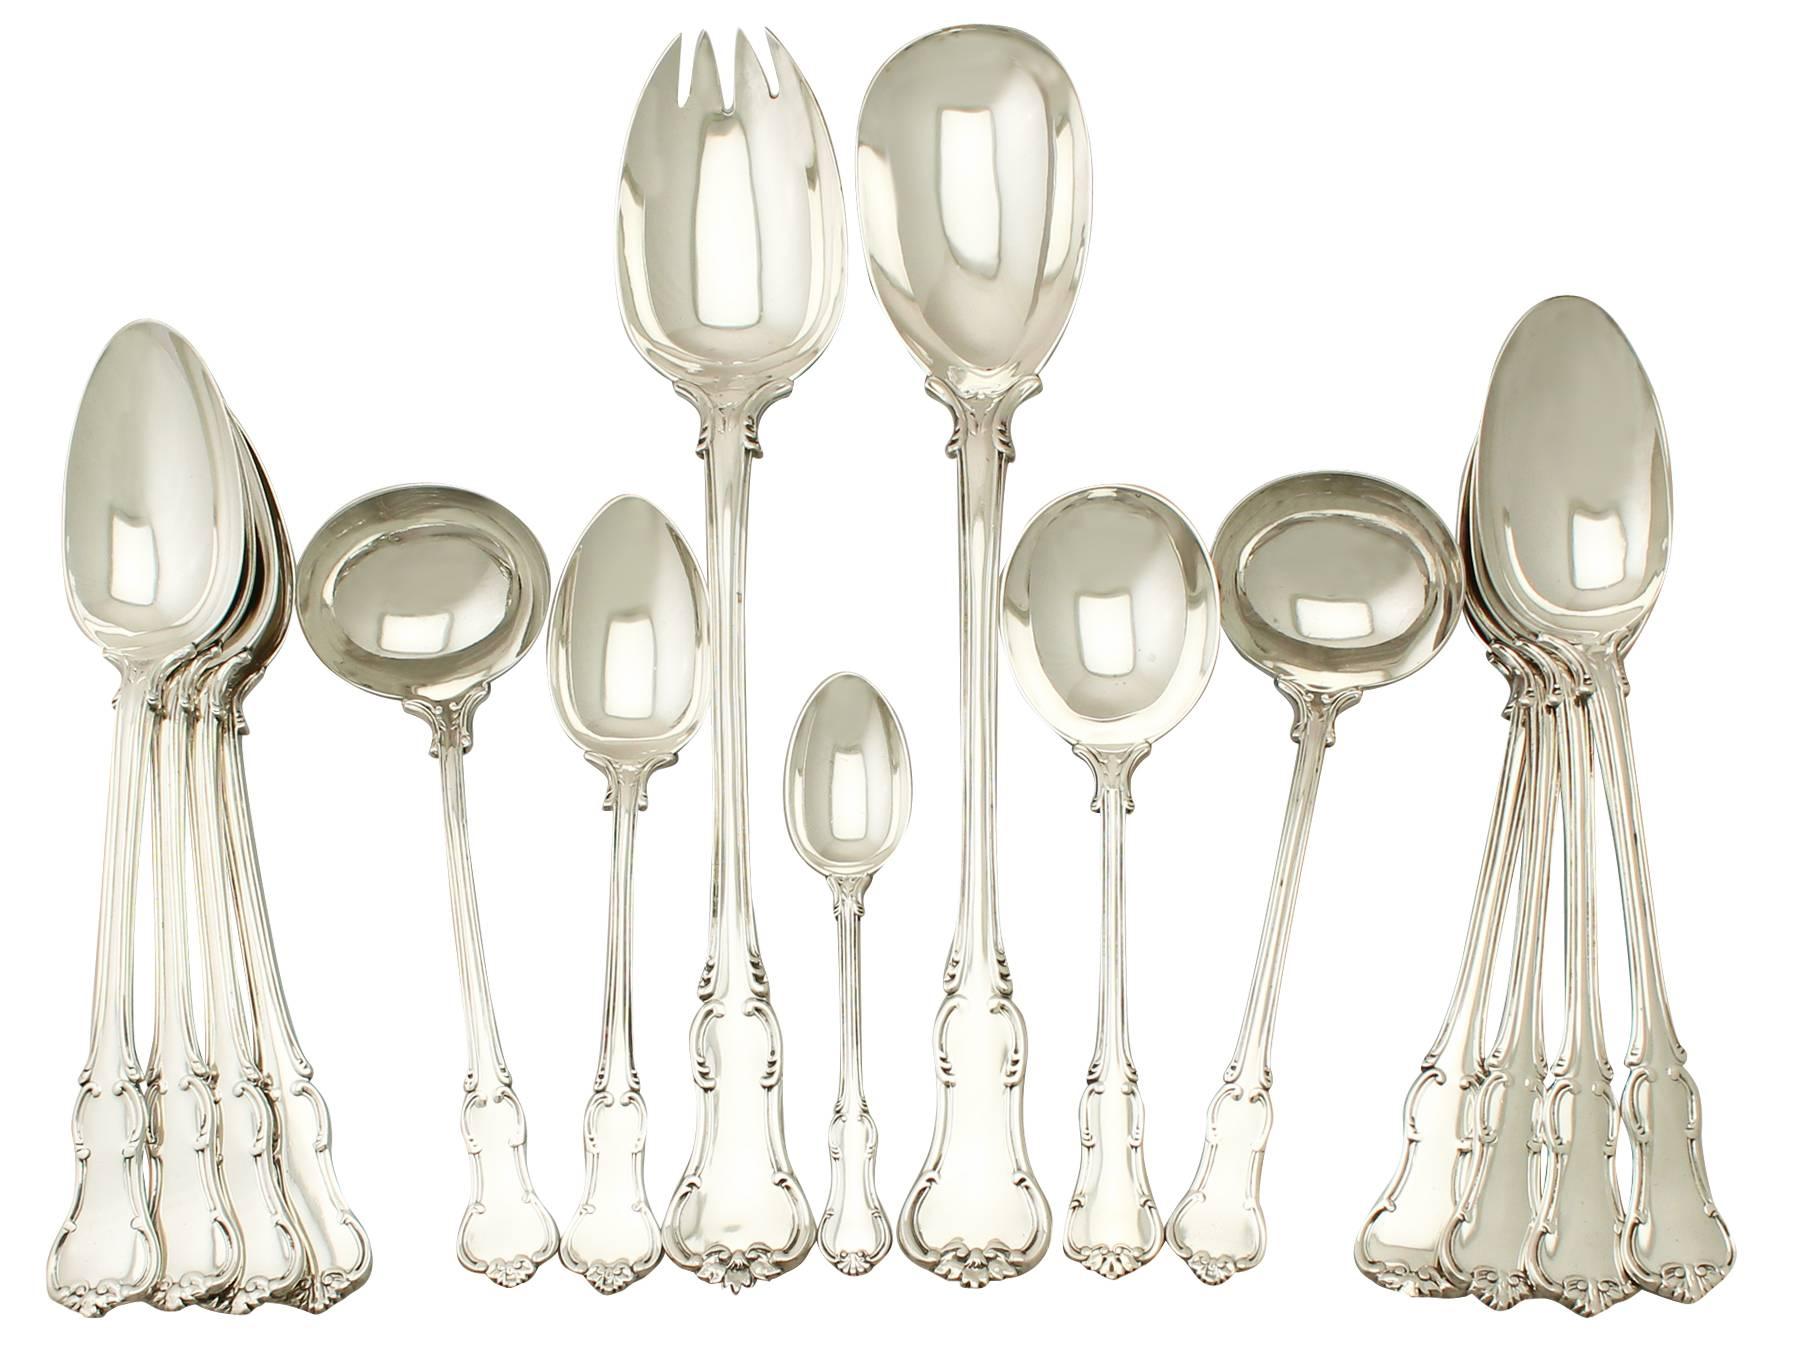 An exceptional, fine and impressive English sterling silver composite flatware service for twelve persons; an addition to our canteen of cutlery collection

The pieces of this exceptional sterling silver flatware service for twelve persons have